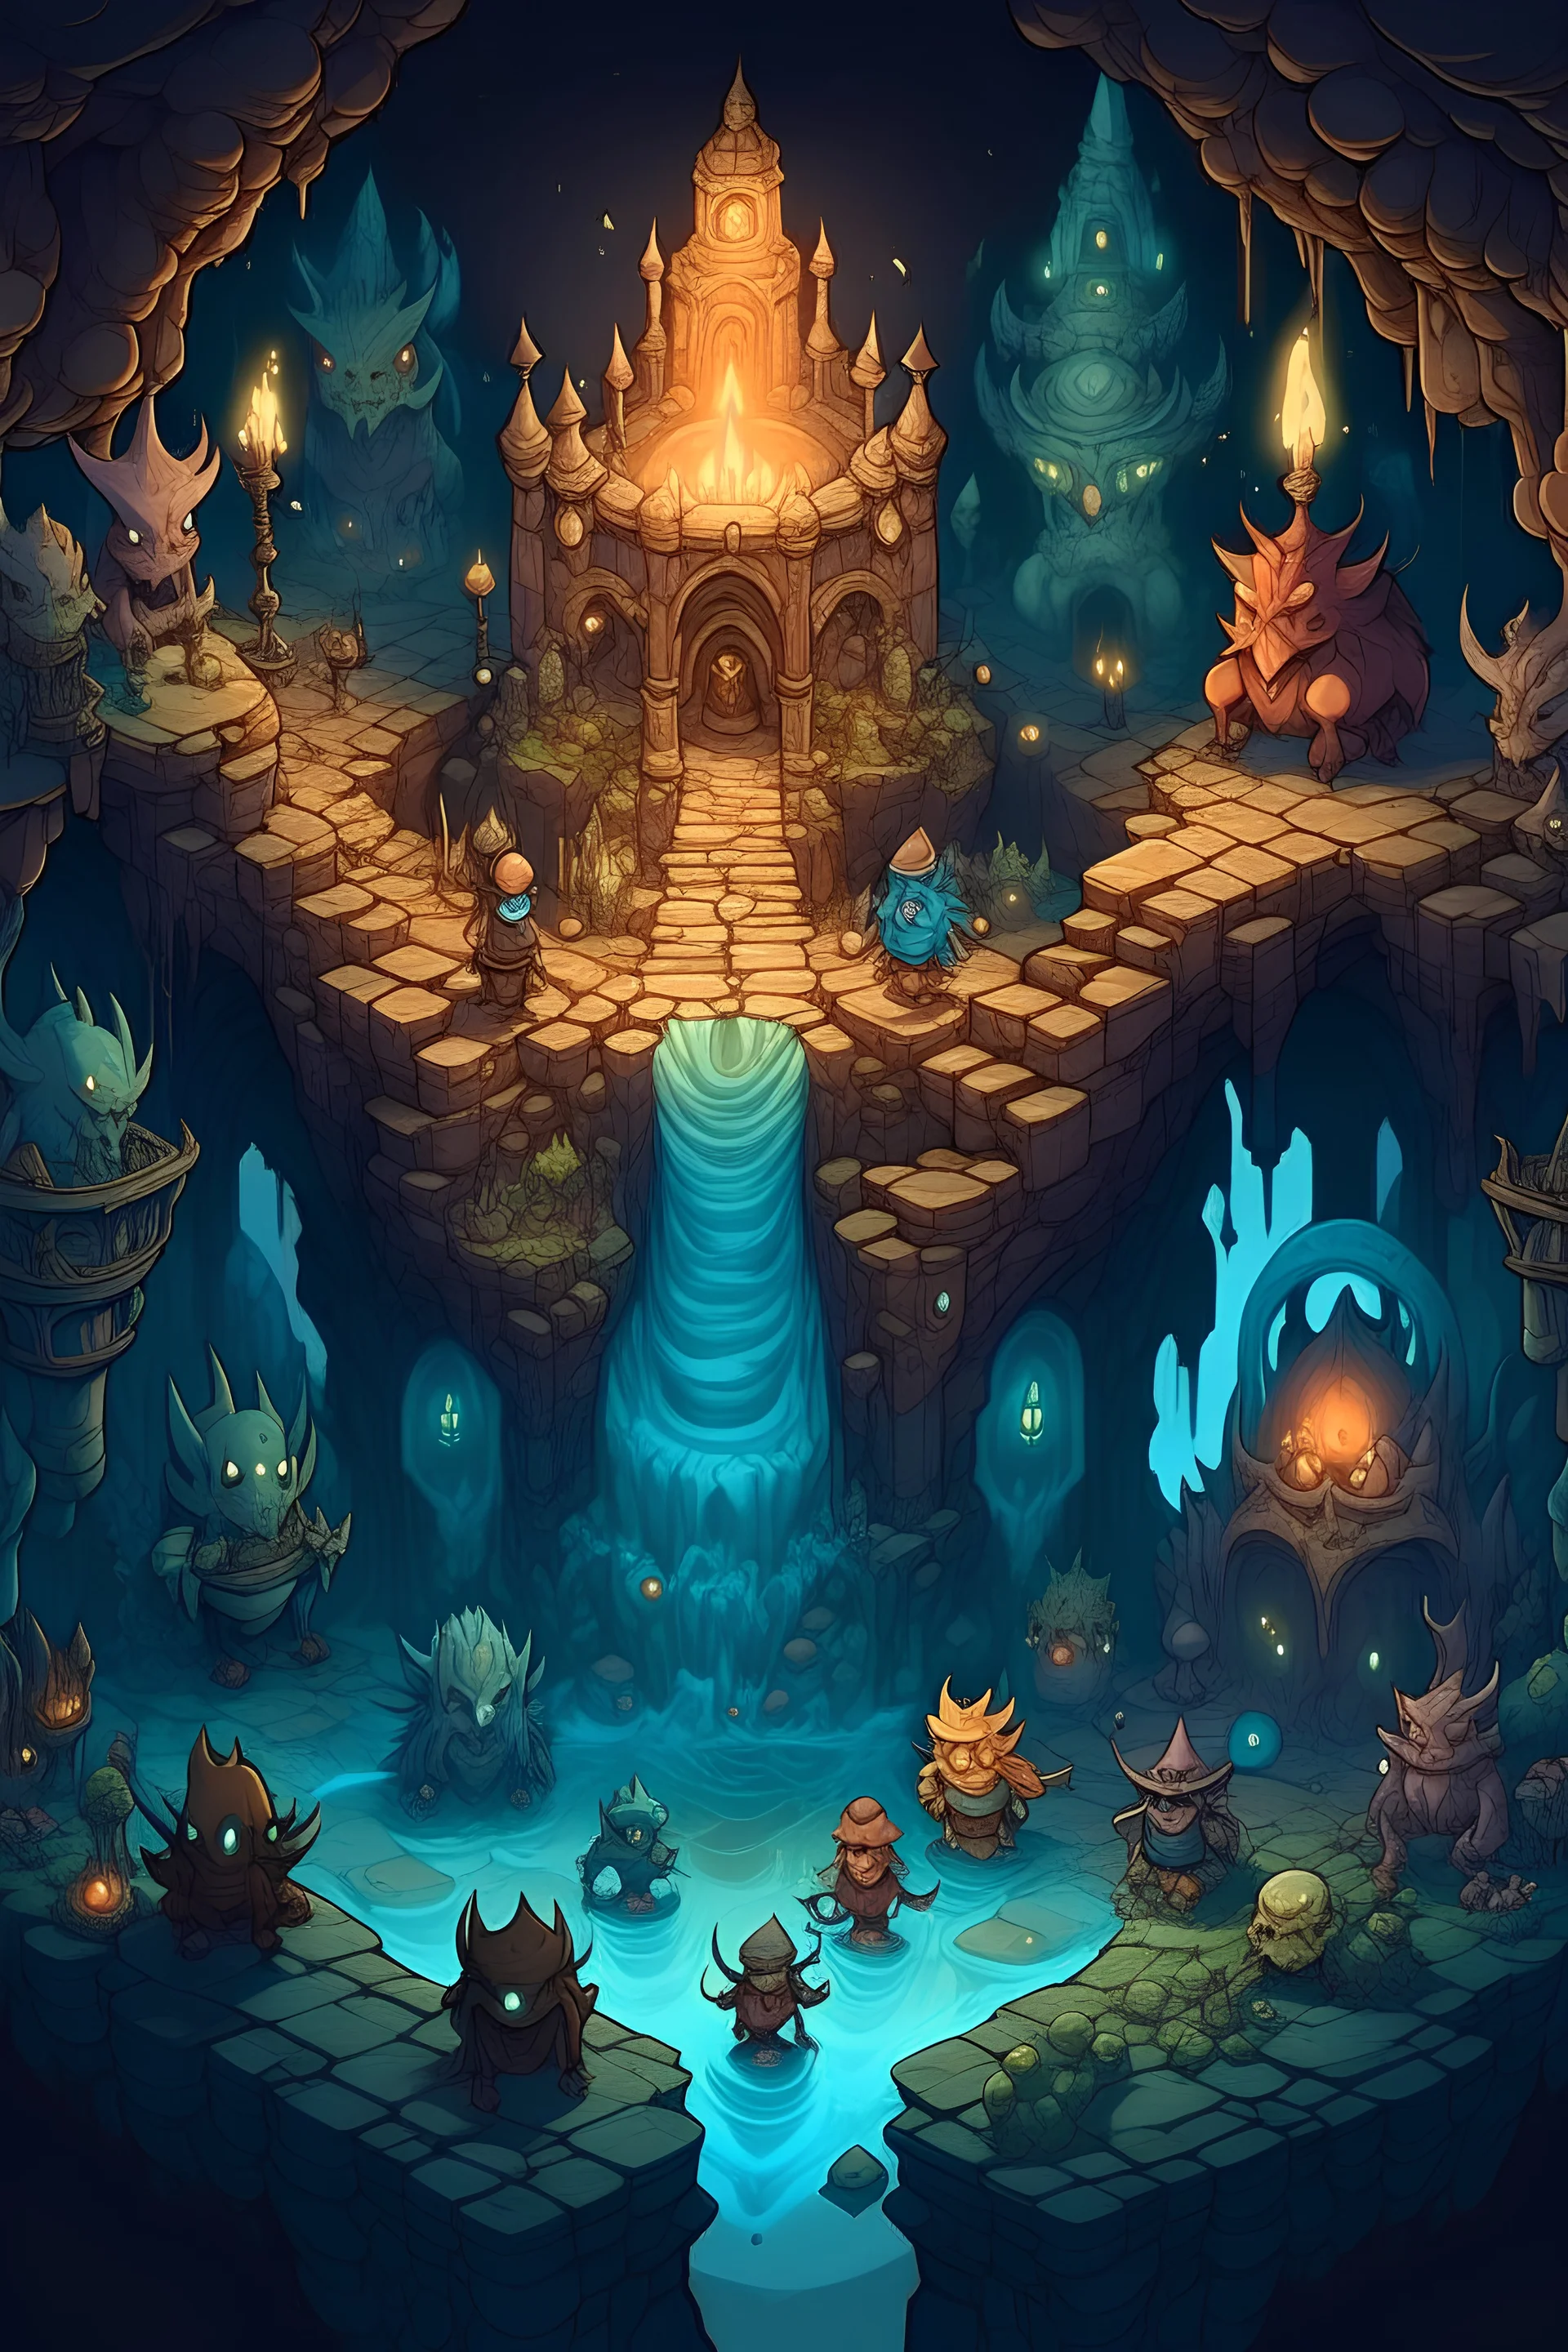 A magical dungeon in another world with many monsters